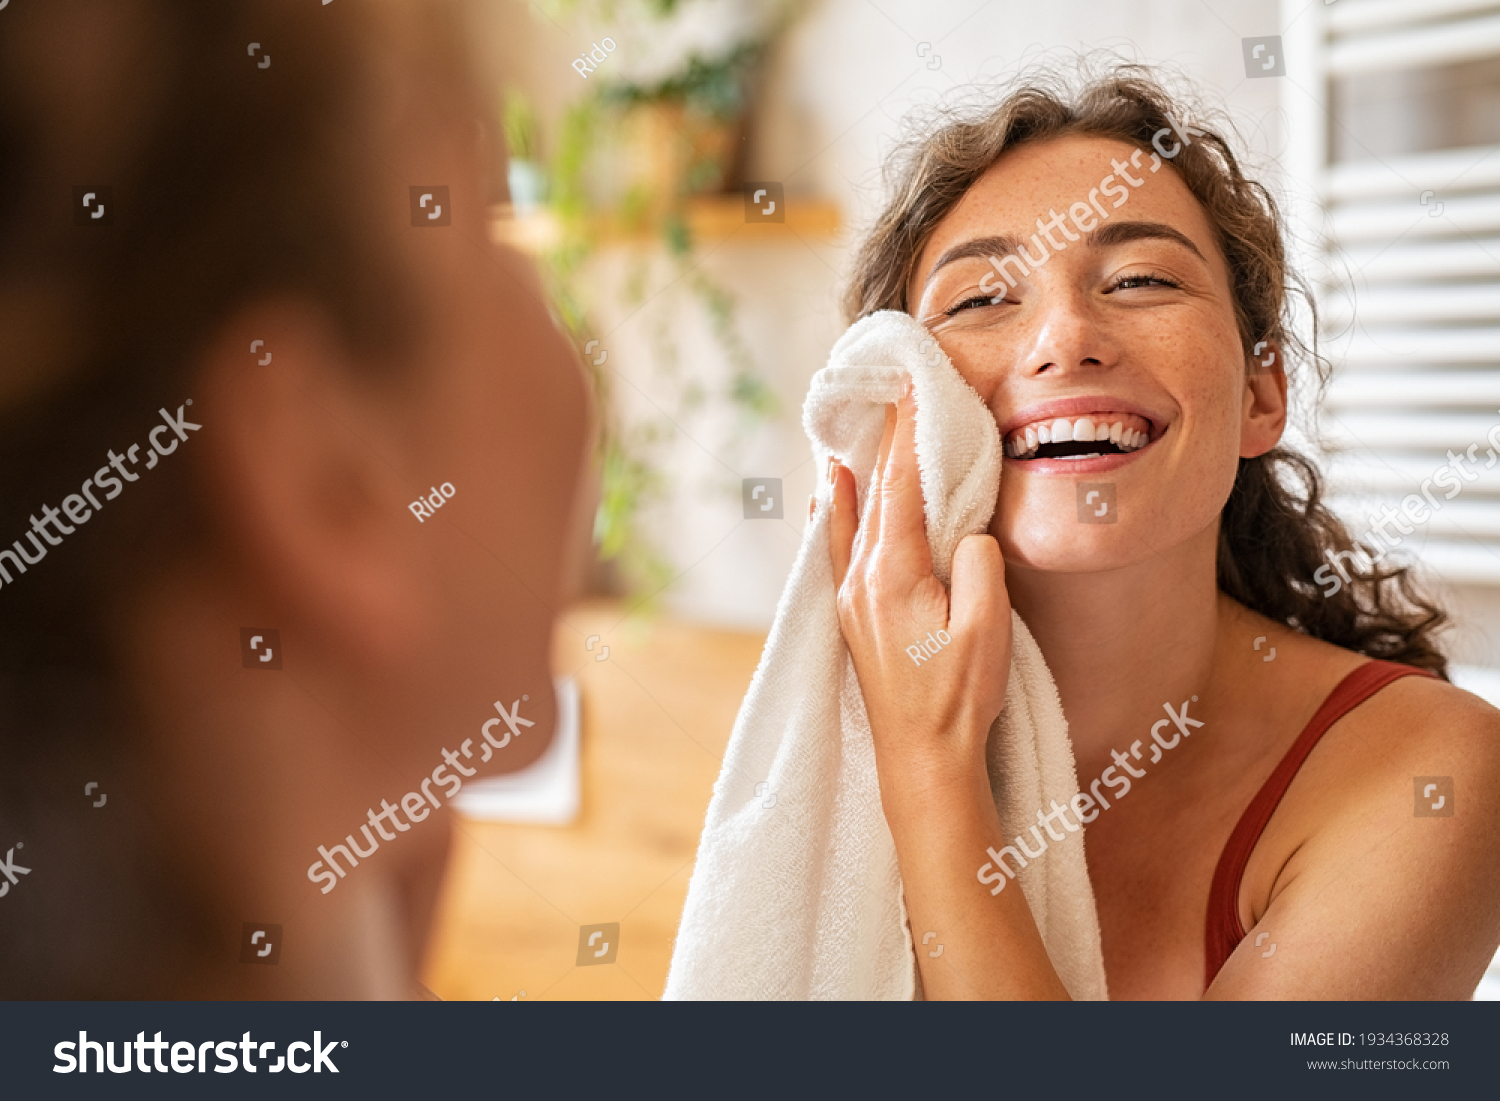 Young woman wiping her face with towel after waking up in the morning. Beautiful happy smiling girl holding towel near facial skin after washing face. Happy woman cleaning and drying skin with napkin. #1934368328